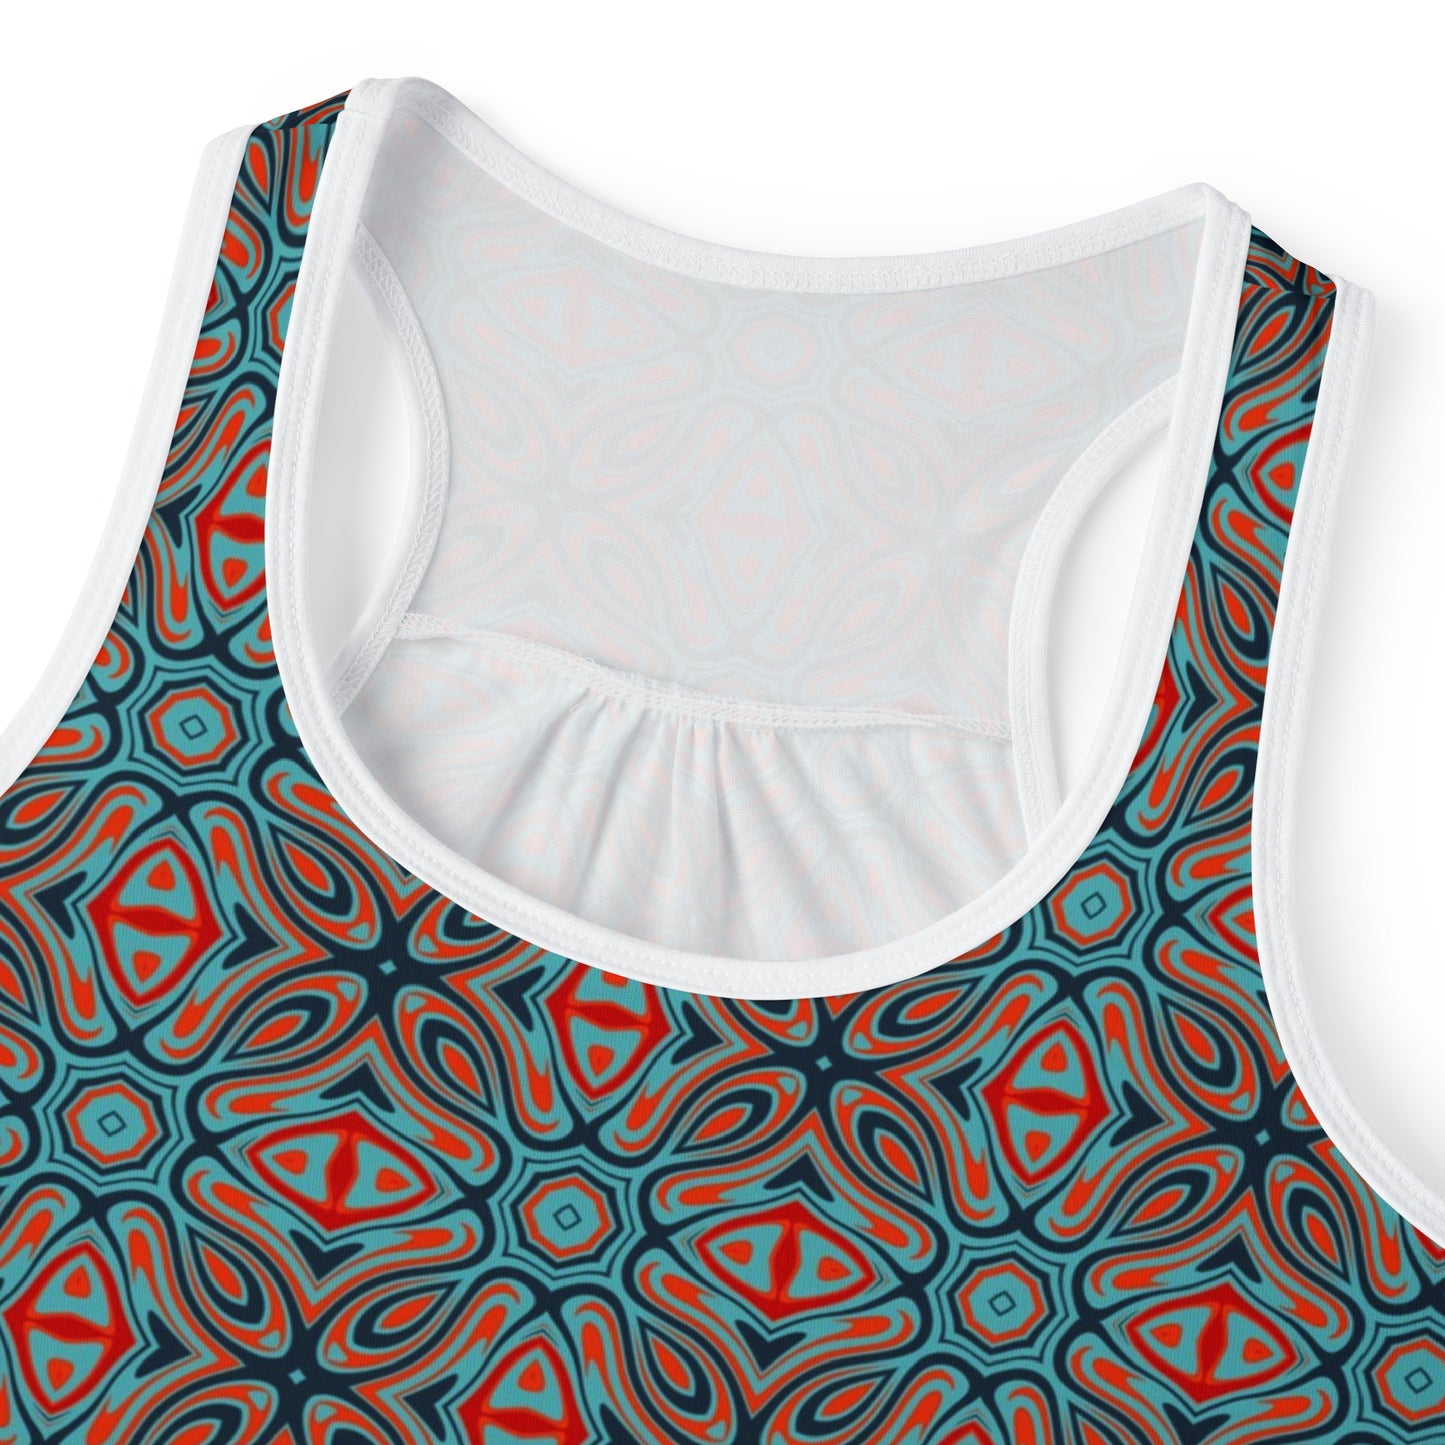 Flattering Fit Women's Tank Top: Confidence in Every Move